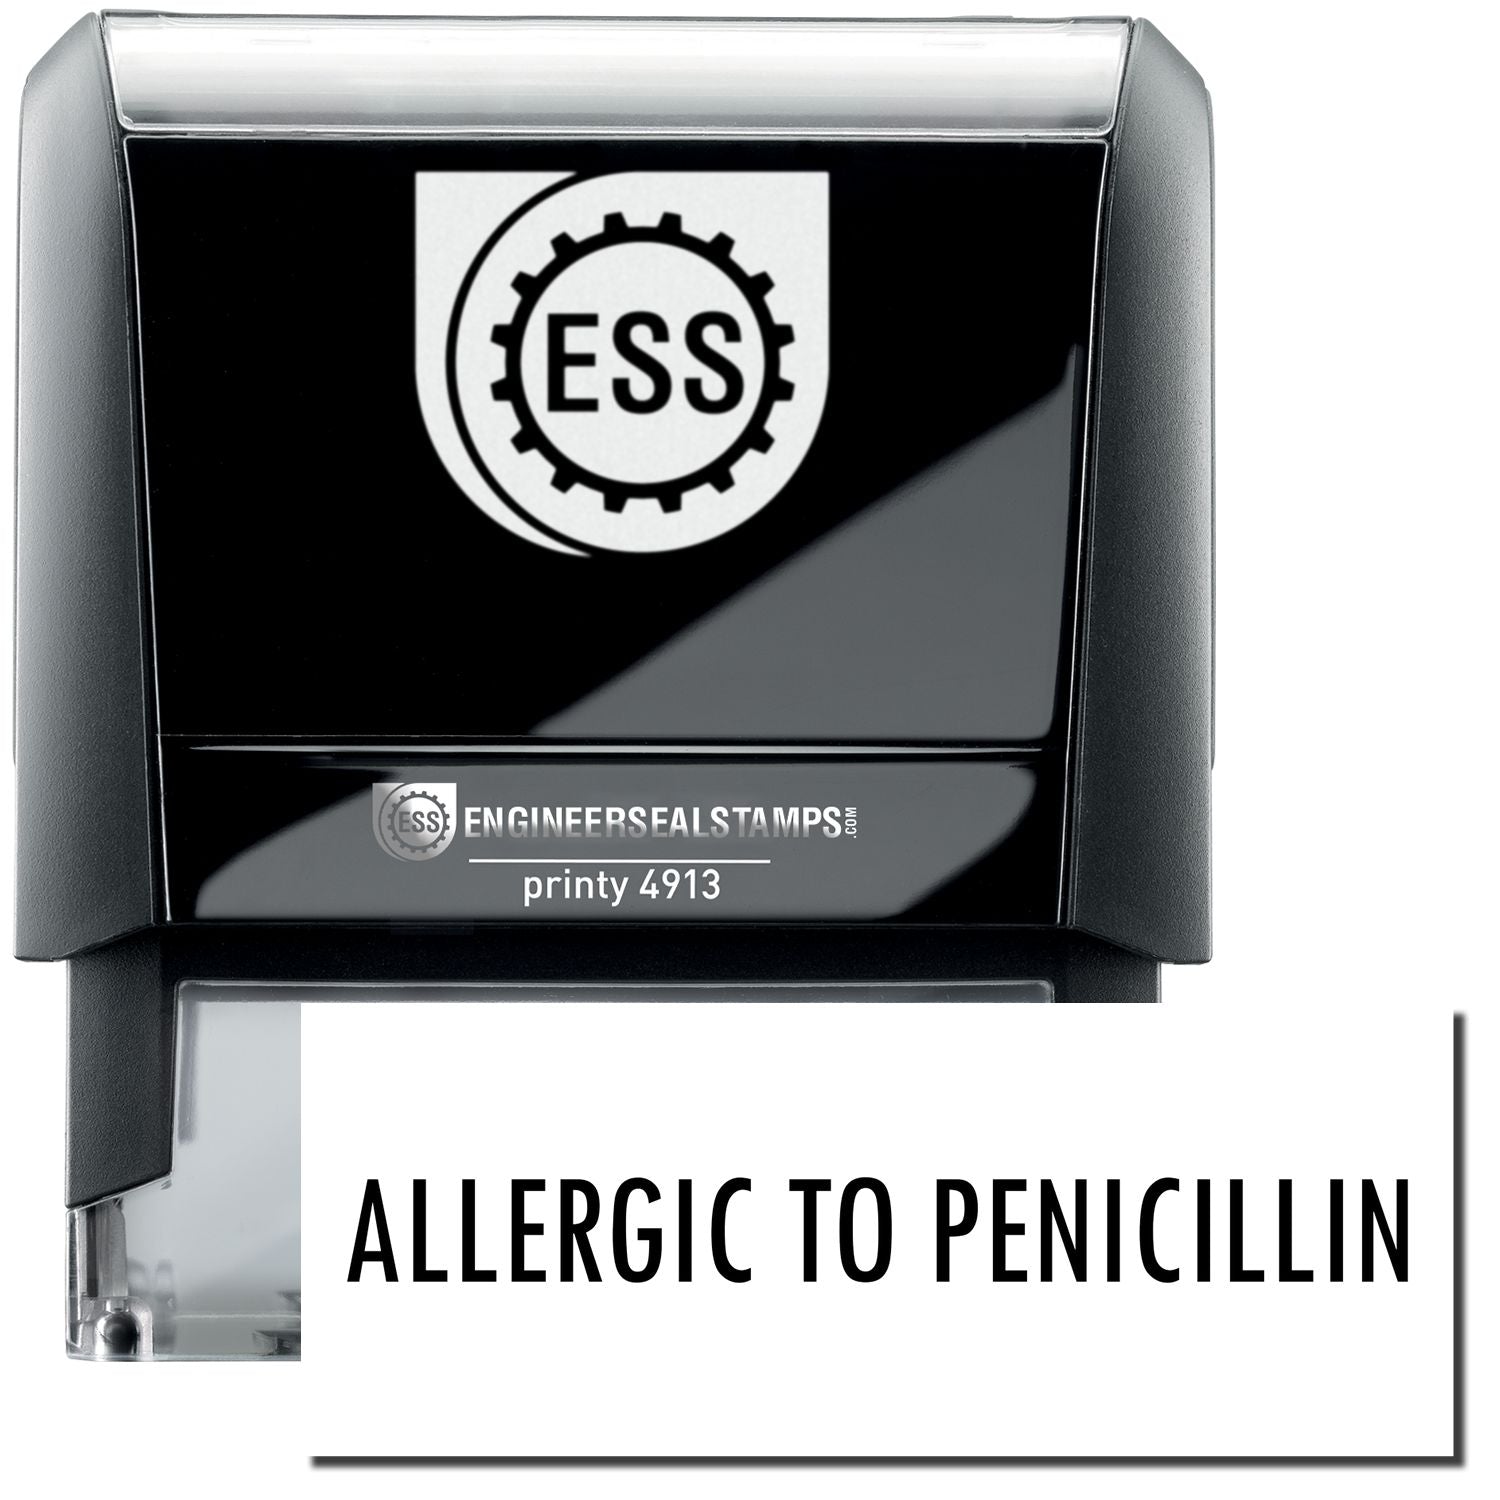 A self-inking stamp with a stamped image showing how the text "ALLERGIC TO PENICILLIN" in a large bold font is displayed by it.